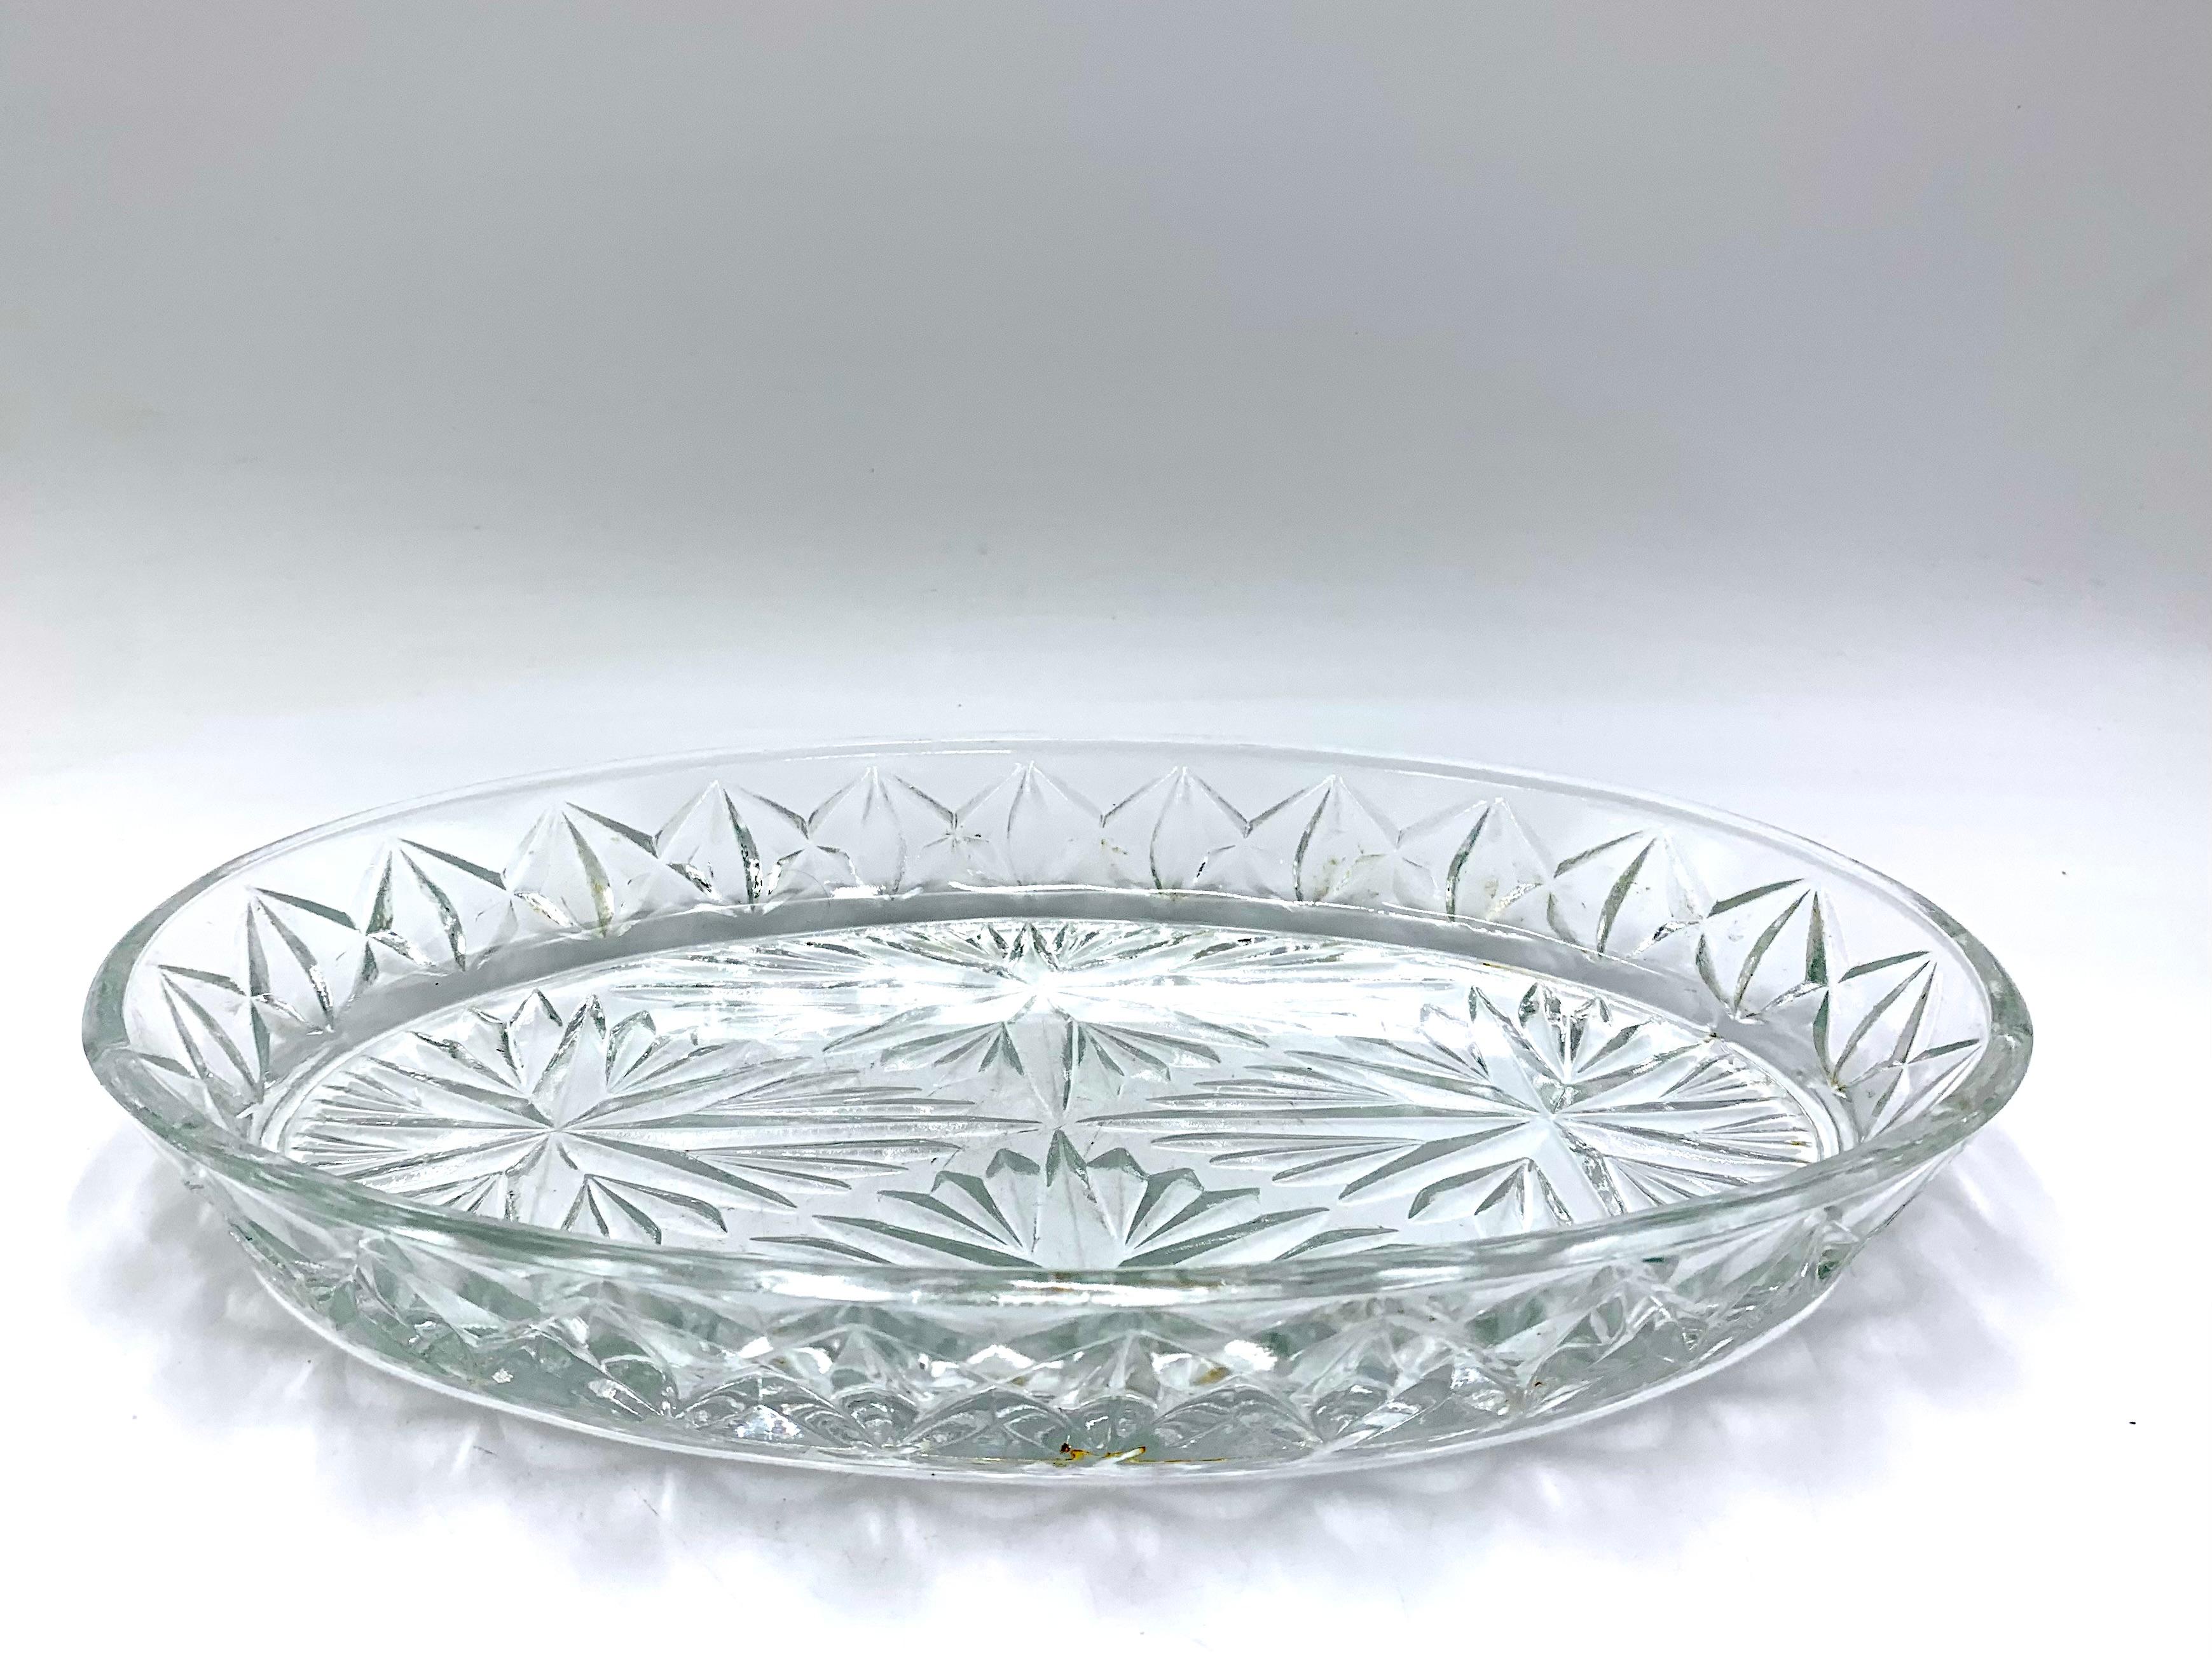 Crystal bowl - platter for fruit or sweets.
Made in Poland in the 1950s / 1960s.
Very good condition.
Dimensions: height 4cm, width 29m, depth 19cm.